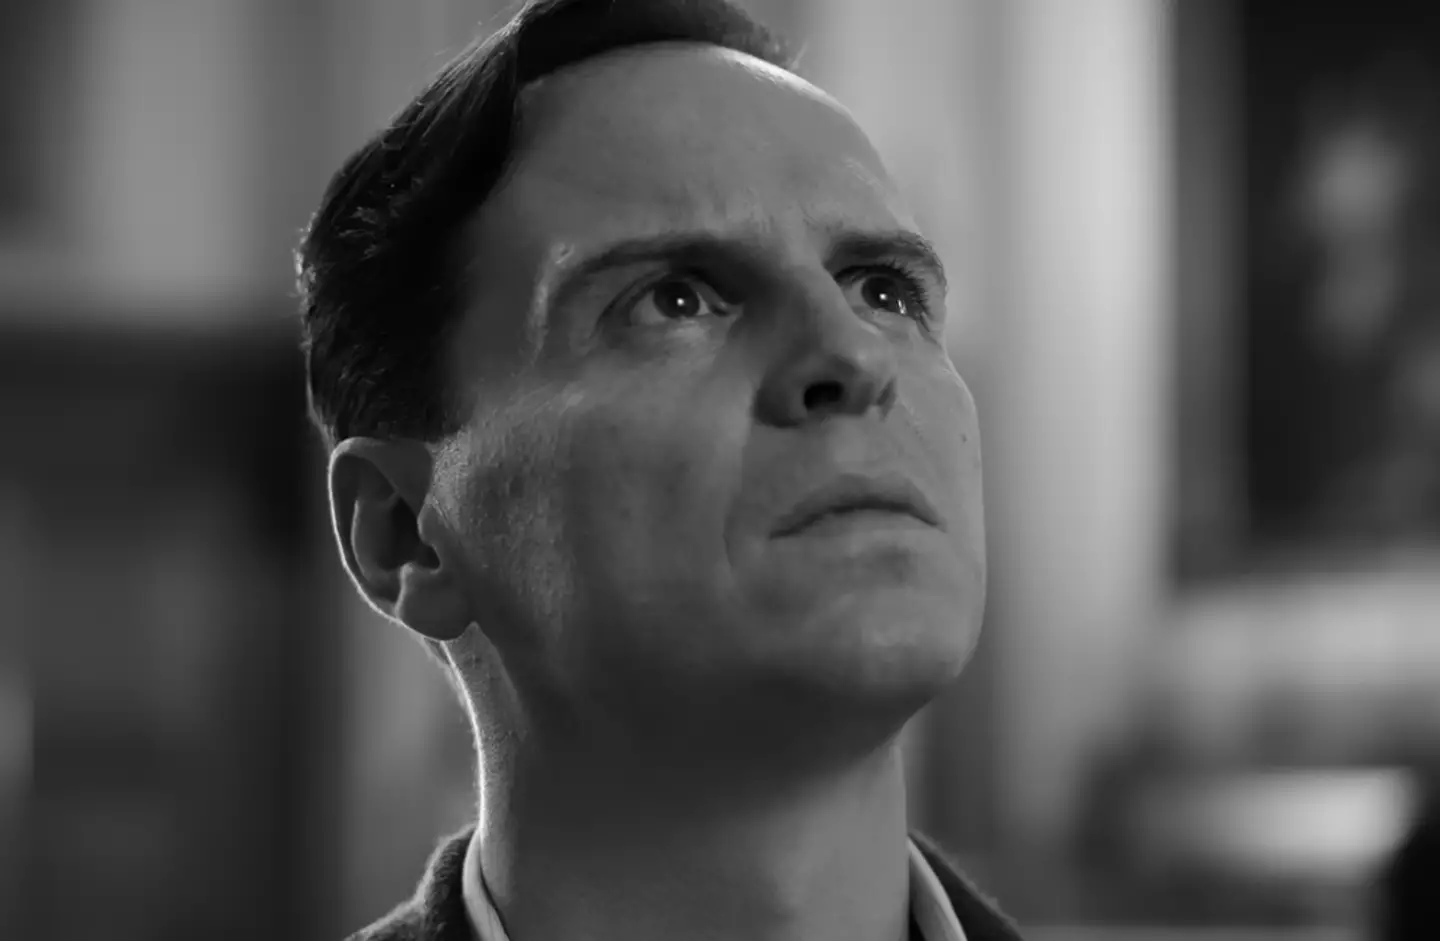 Andrew Scott stars as Thomas Ripley in the series.